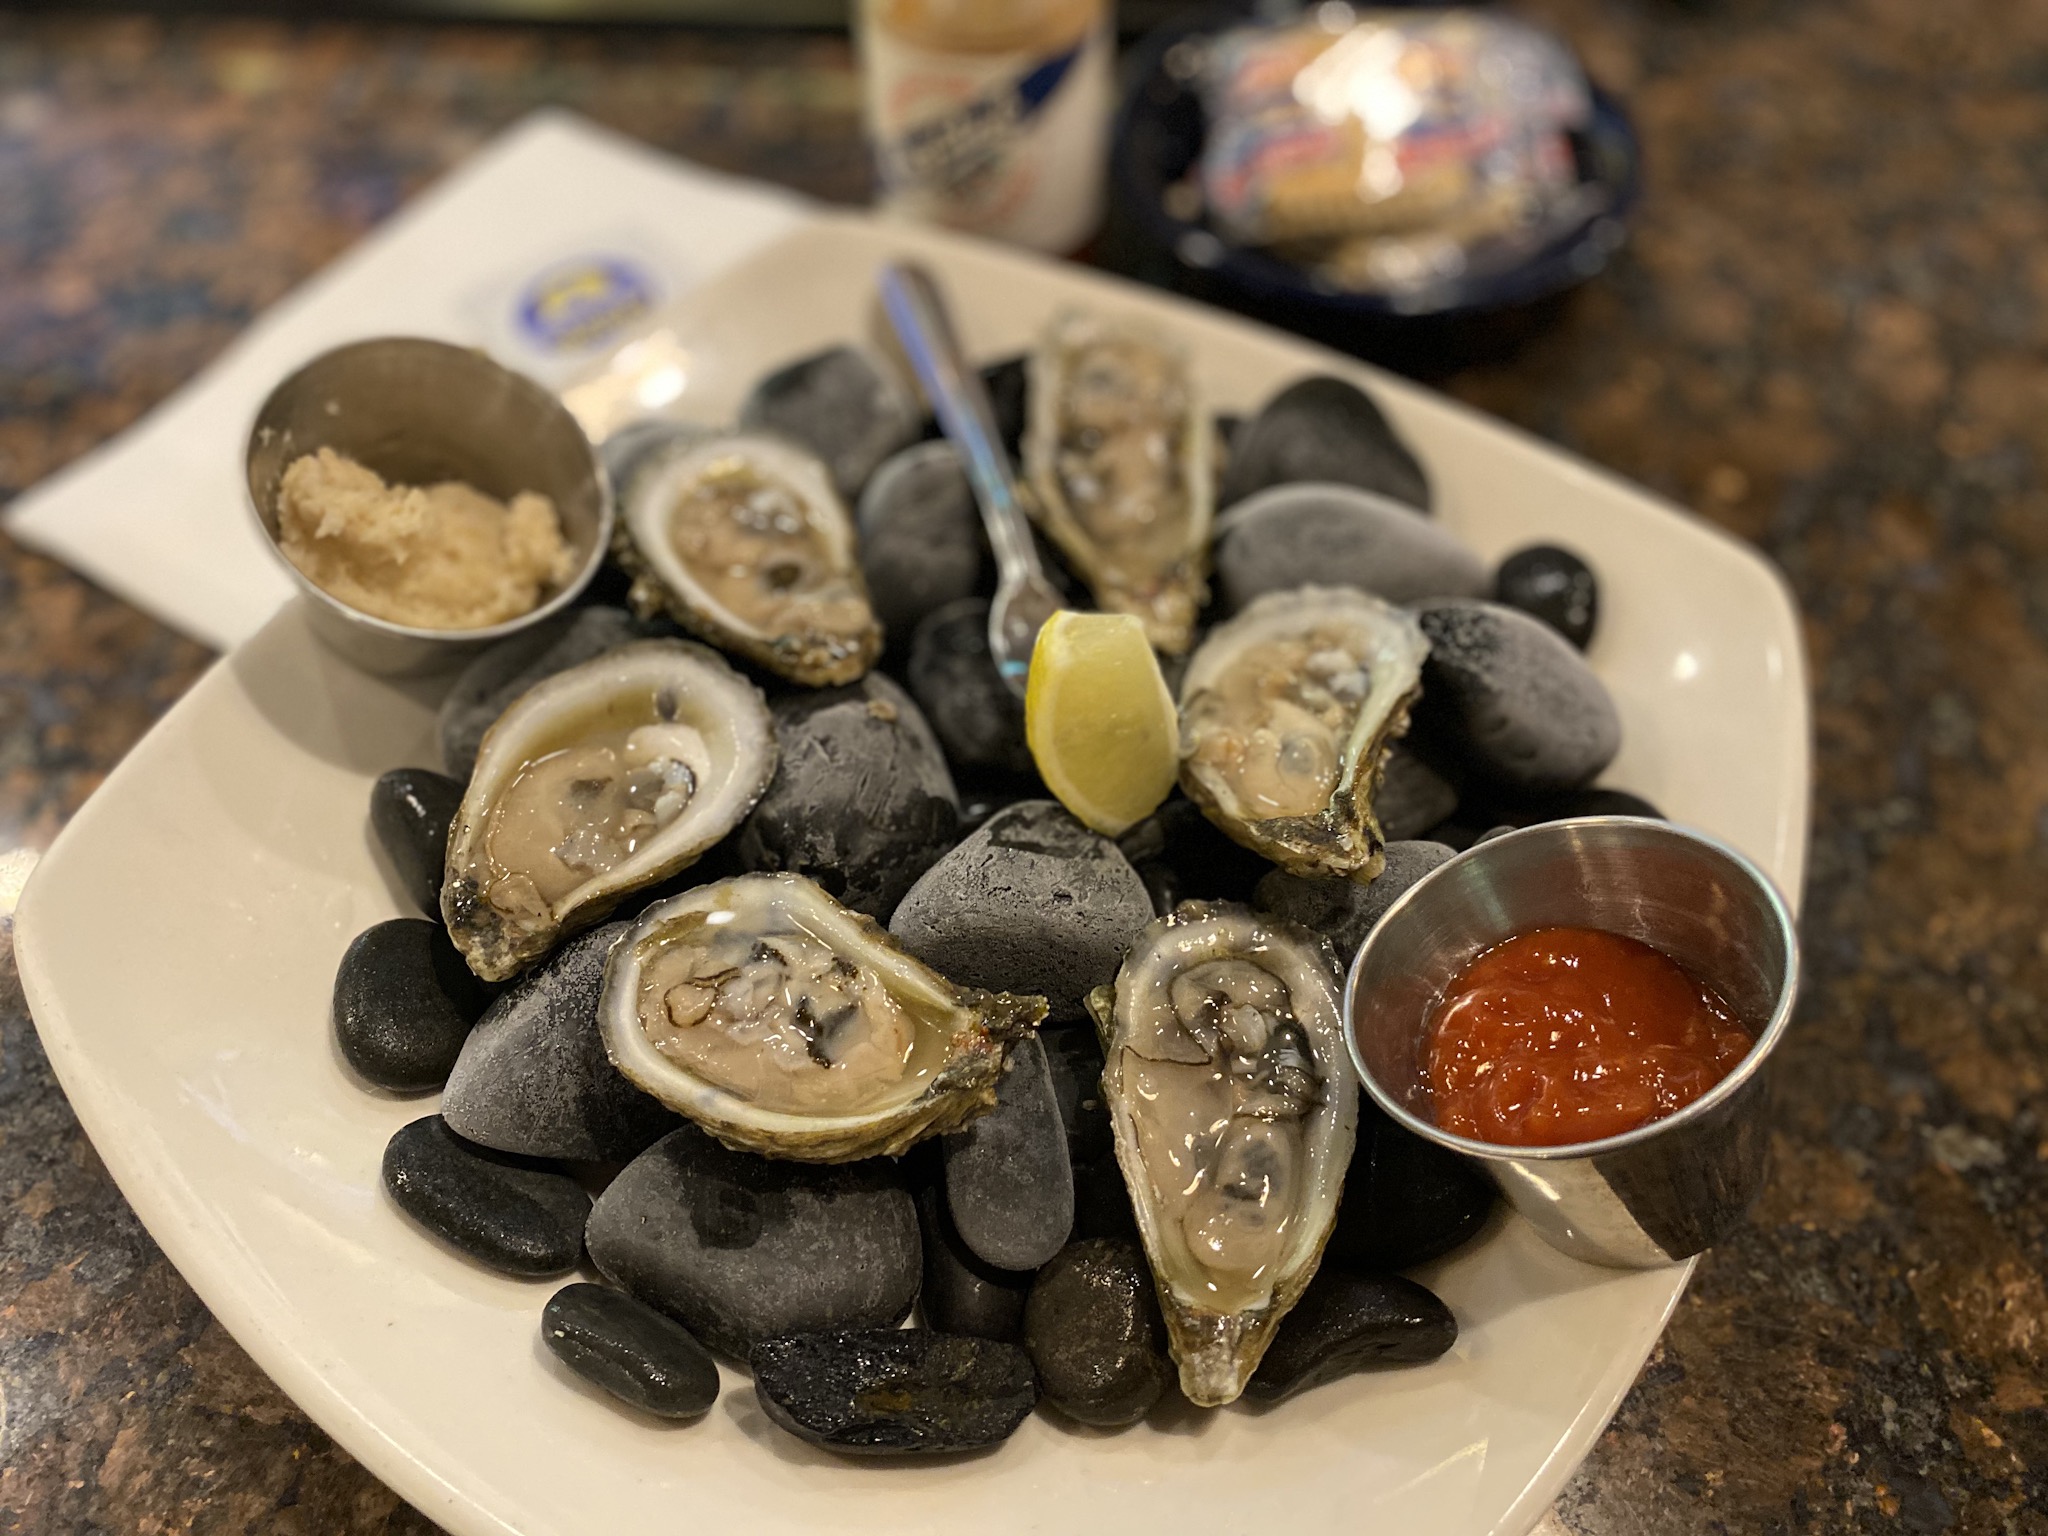 Oysters served on cold black stones